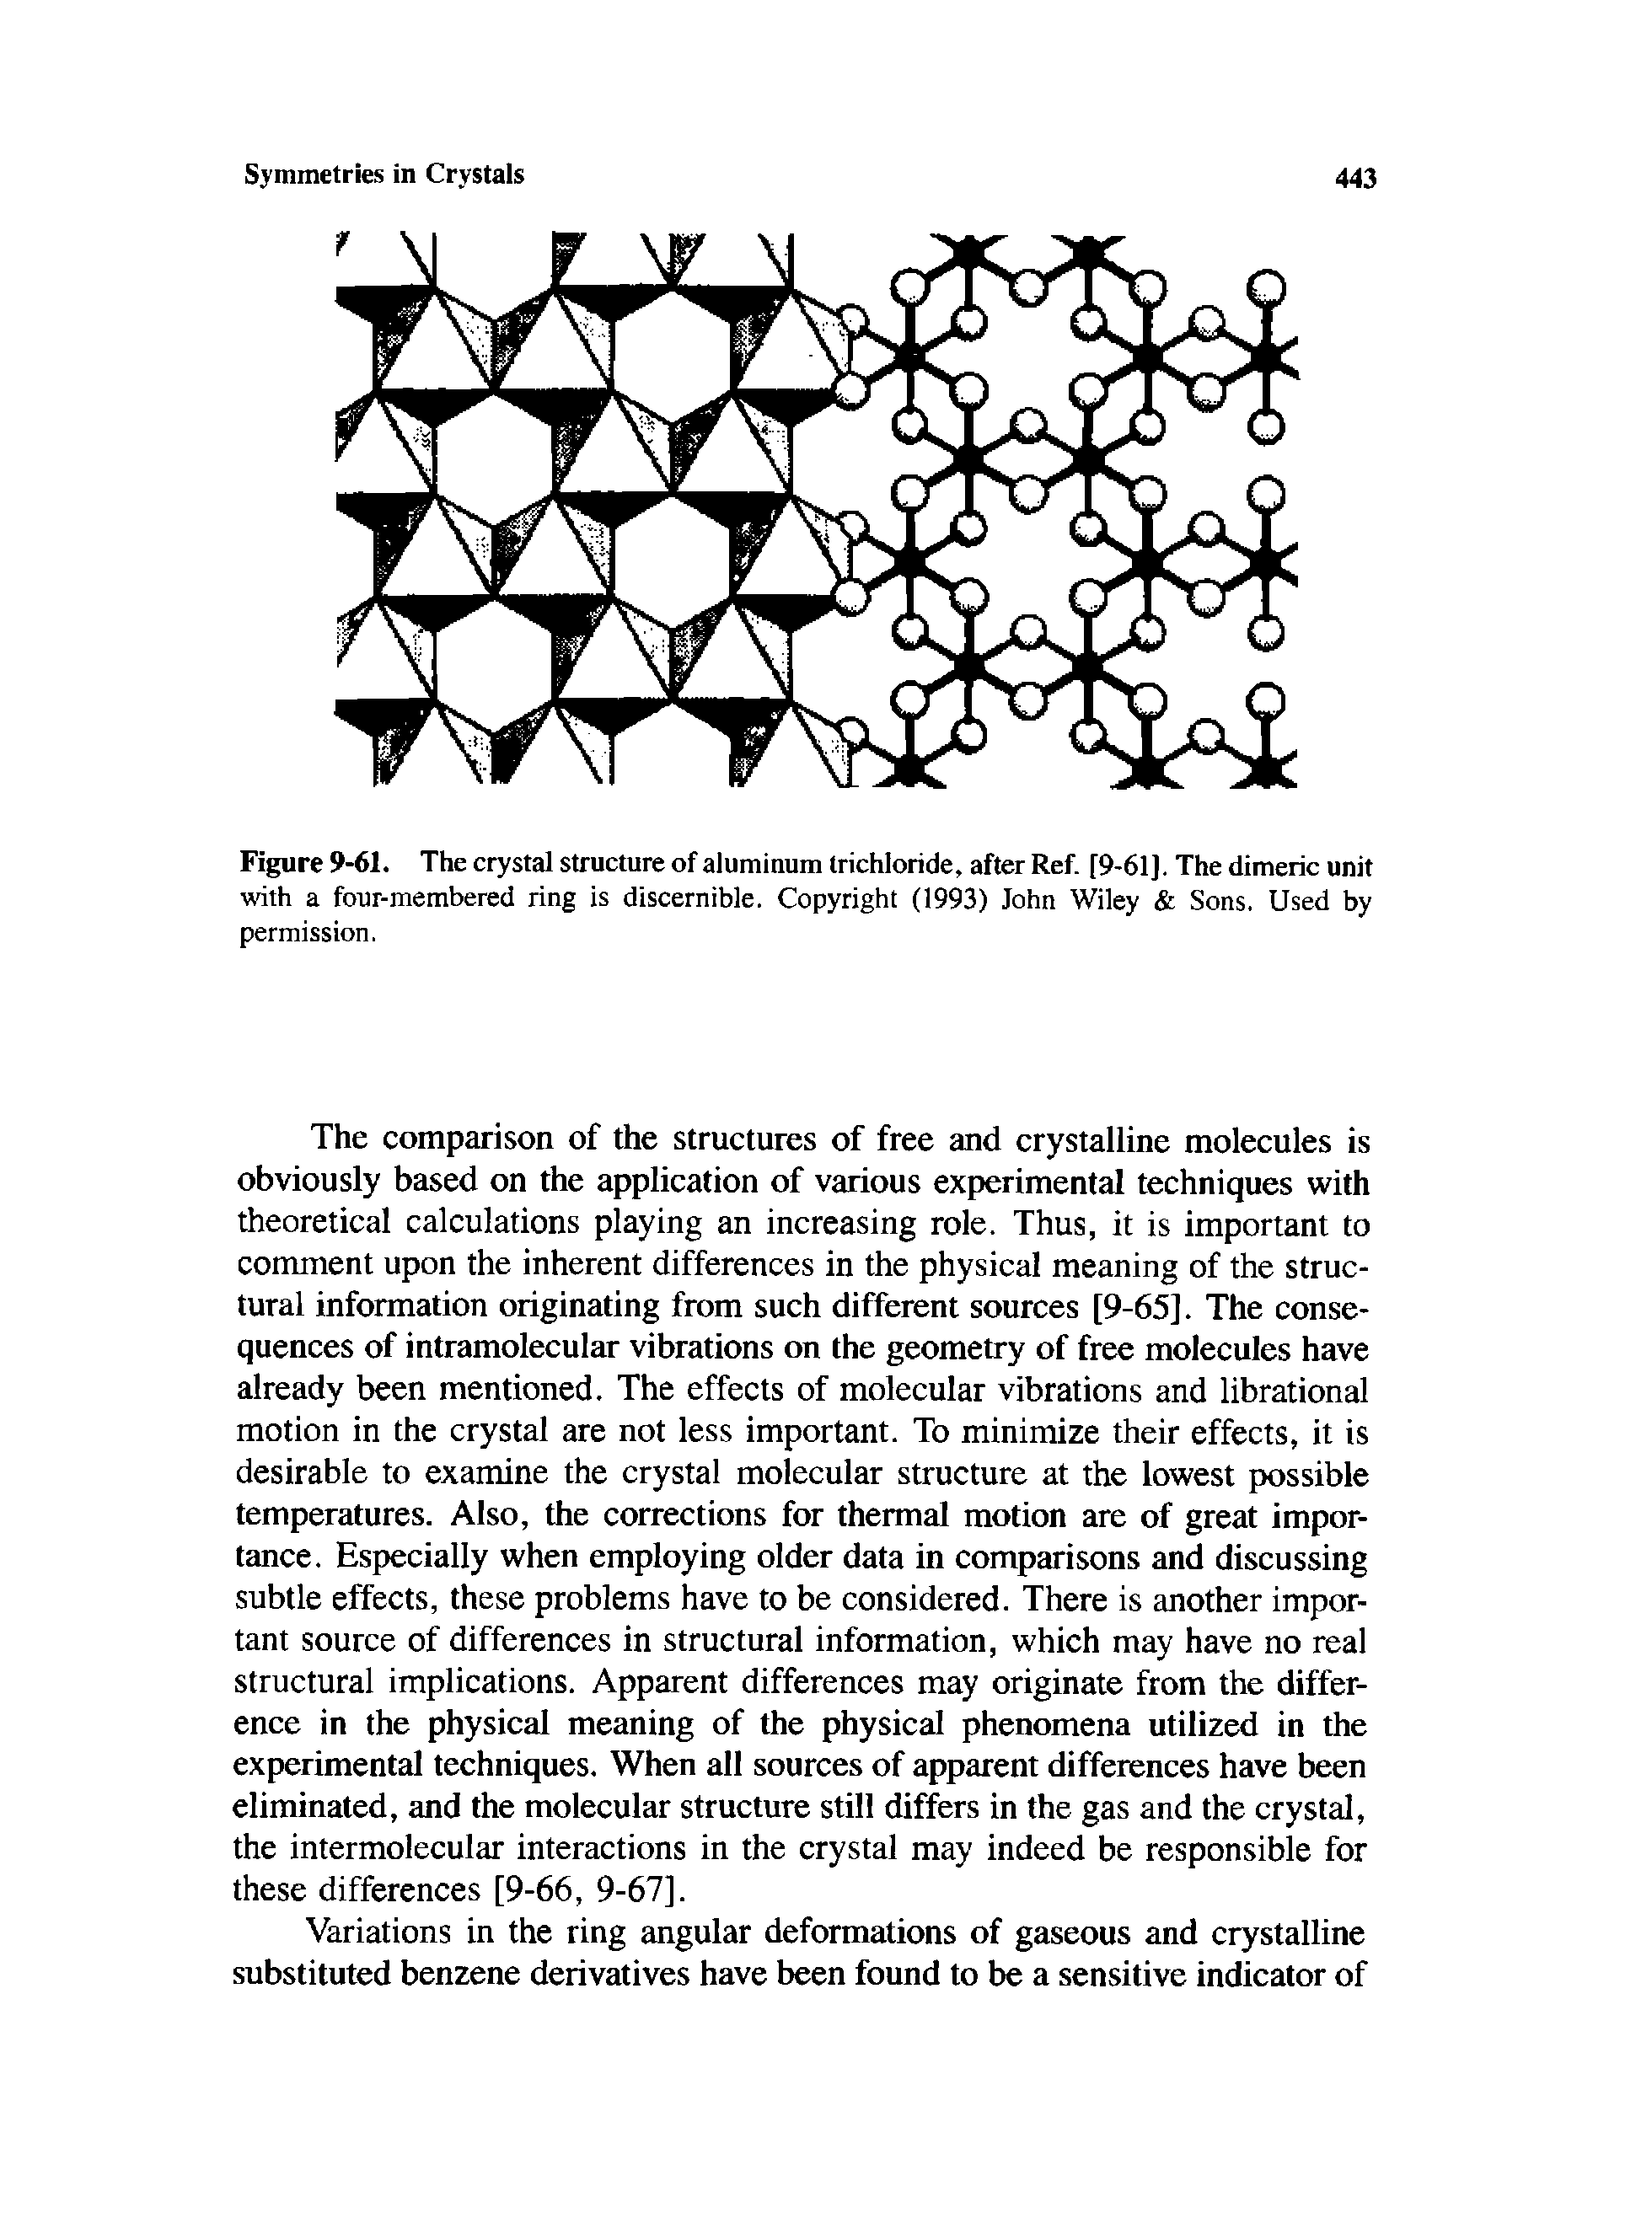 Figure 9-61. The crystal structure of aluminum trichloride, after Ref. f9-61]. The dimeric unit with a four-niembered ring is discernible. Copyright (1993) John Wiley Sons. Used by permission.